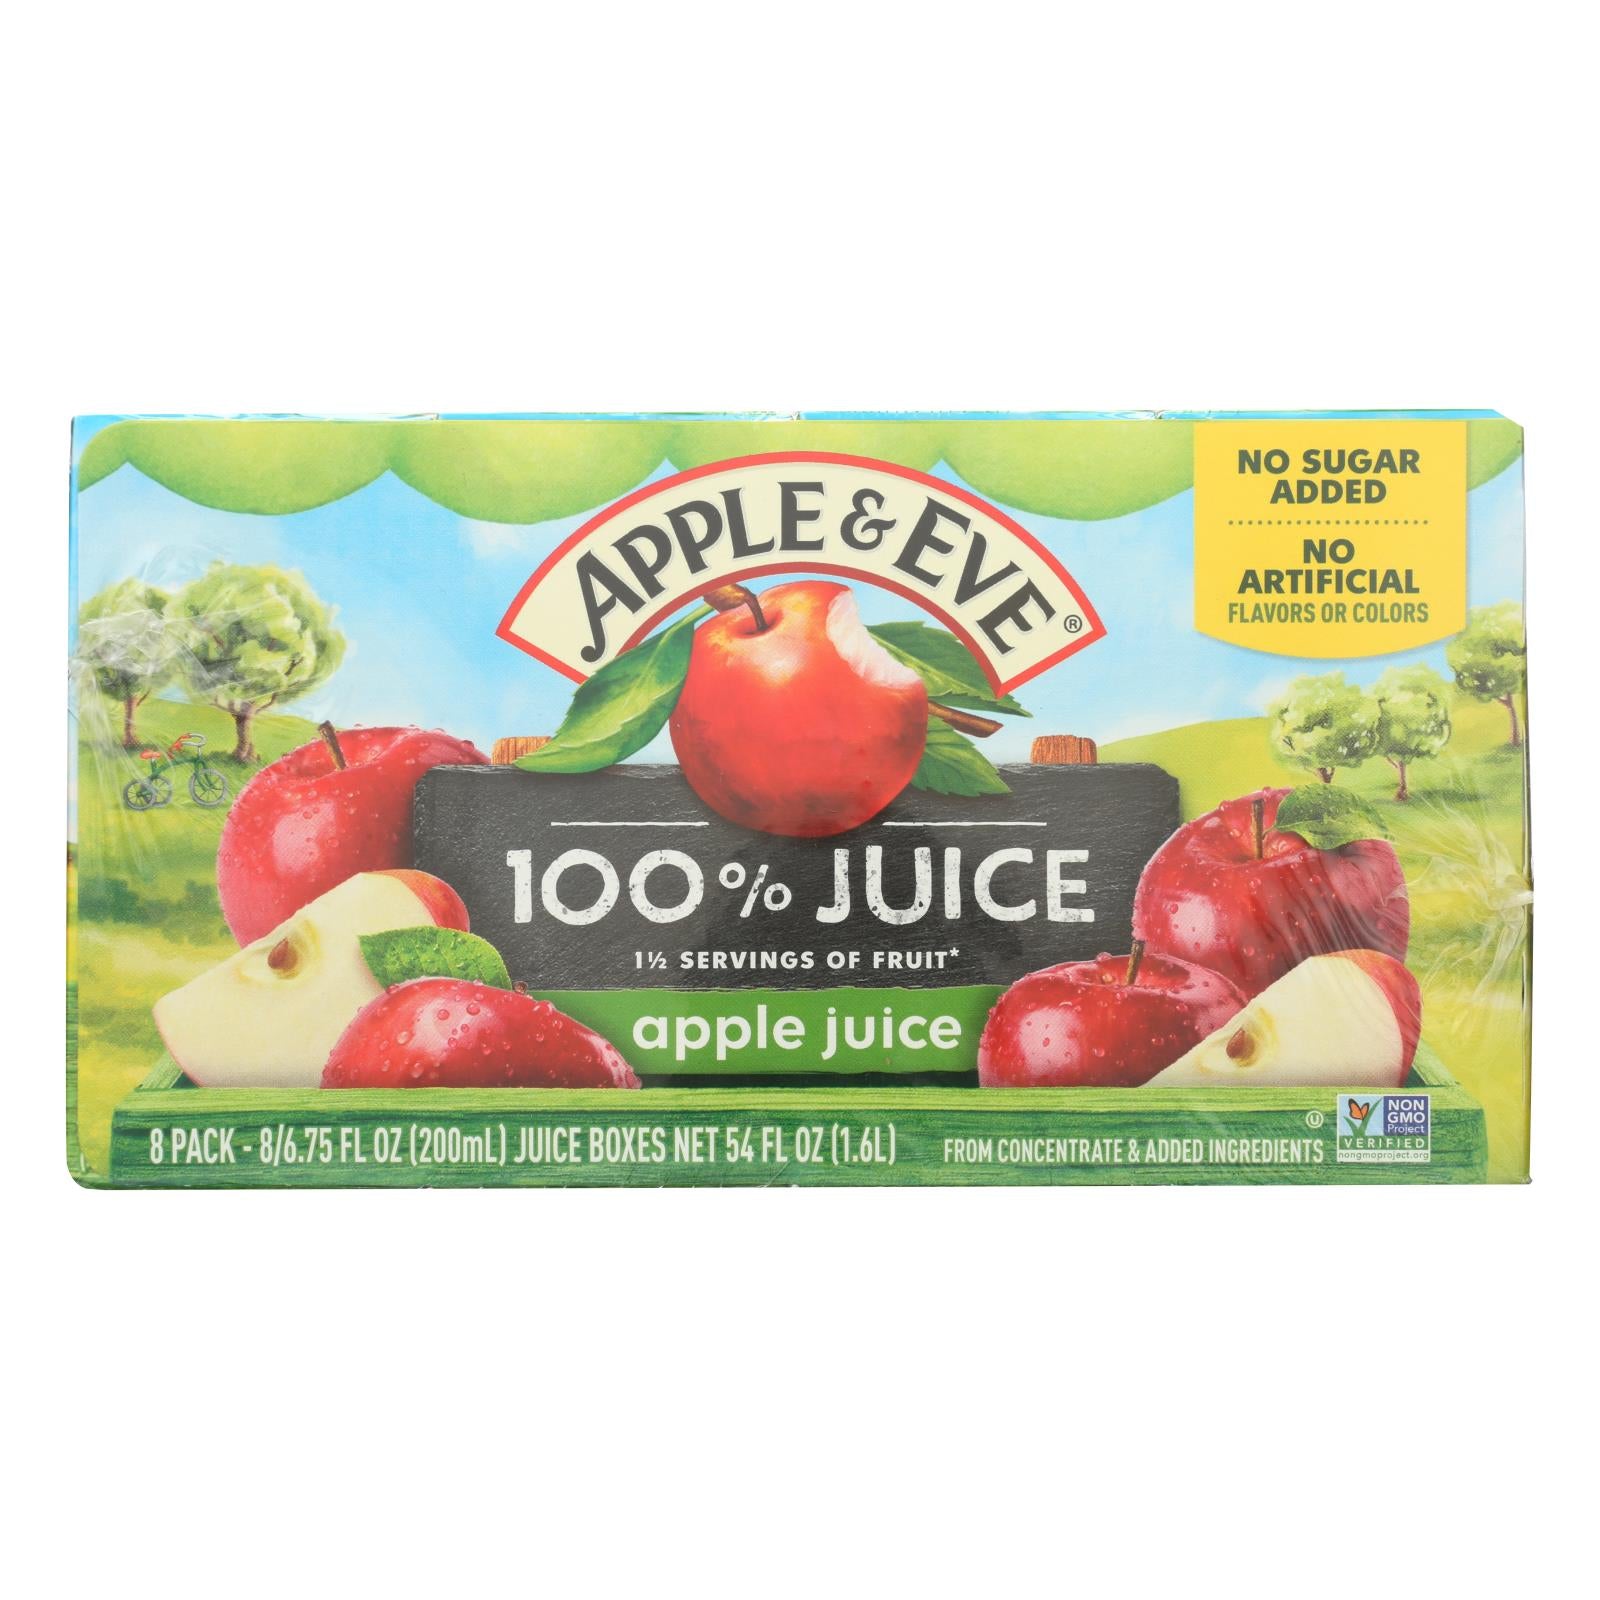 Apple & Eve, Apple and Eve 100 Percent Apple Juice - Case of 6 - 40 Bags (Pack of 5)